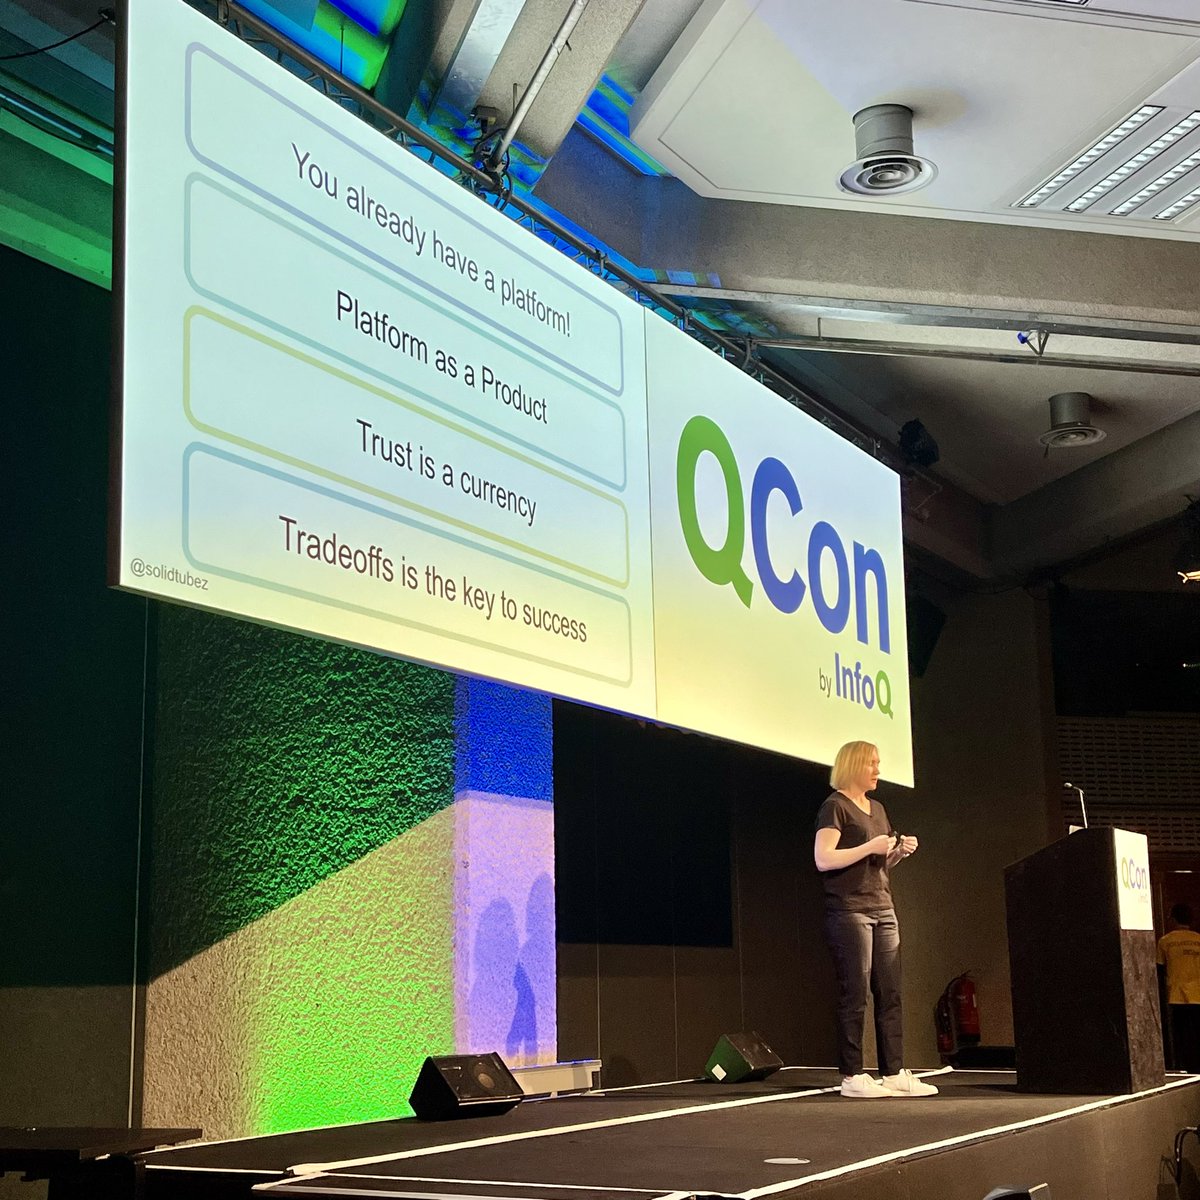 The amazing @solidtubez sharing the story of building your first platform at #QConLondon “You already have a platform - but you might not realise it”